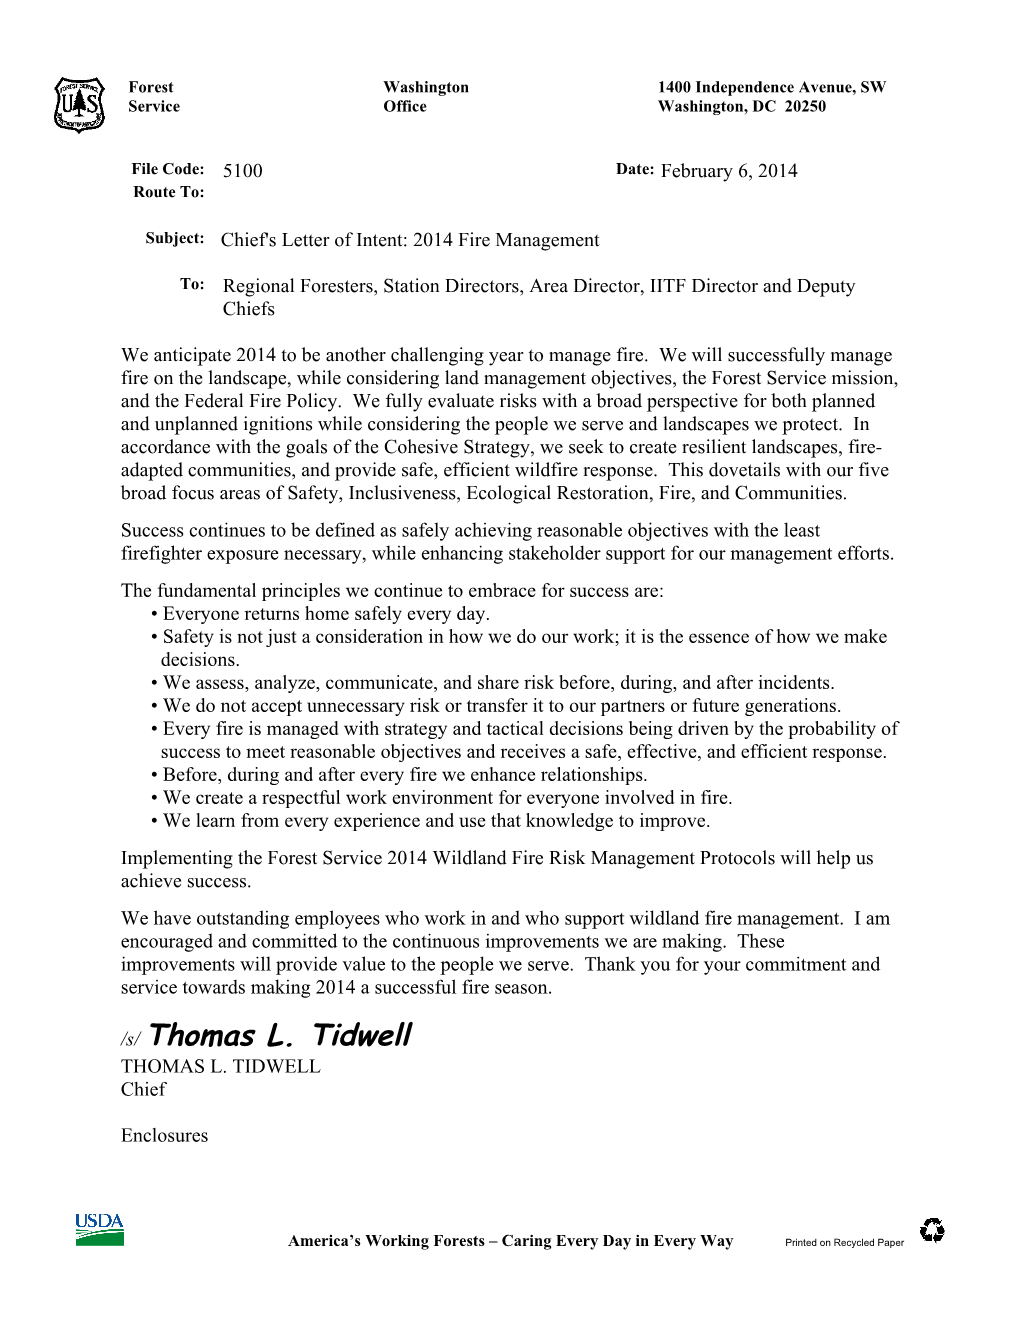 Chief's Letter of Intent: 2014 Fire Management